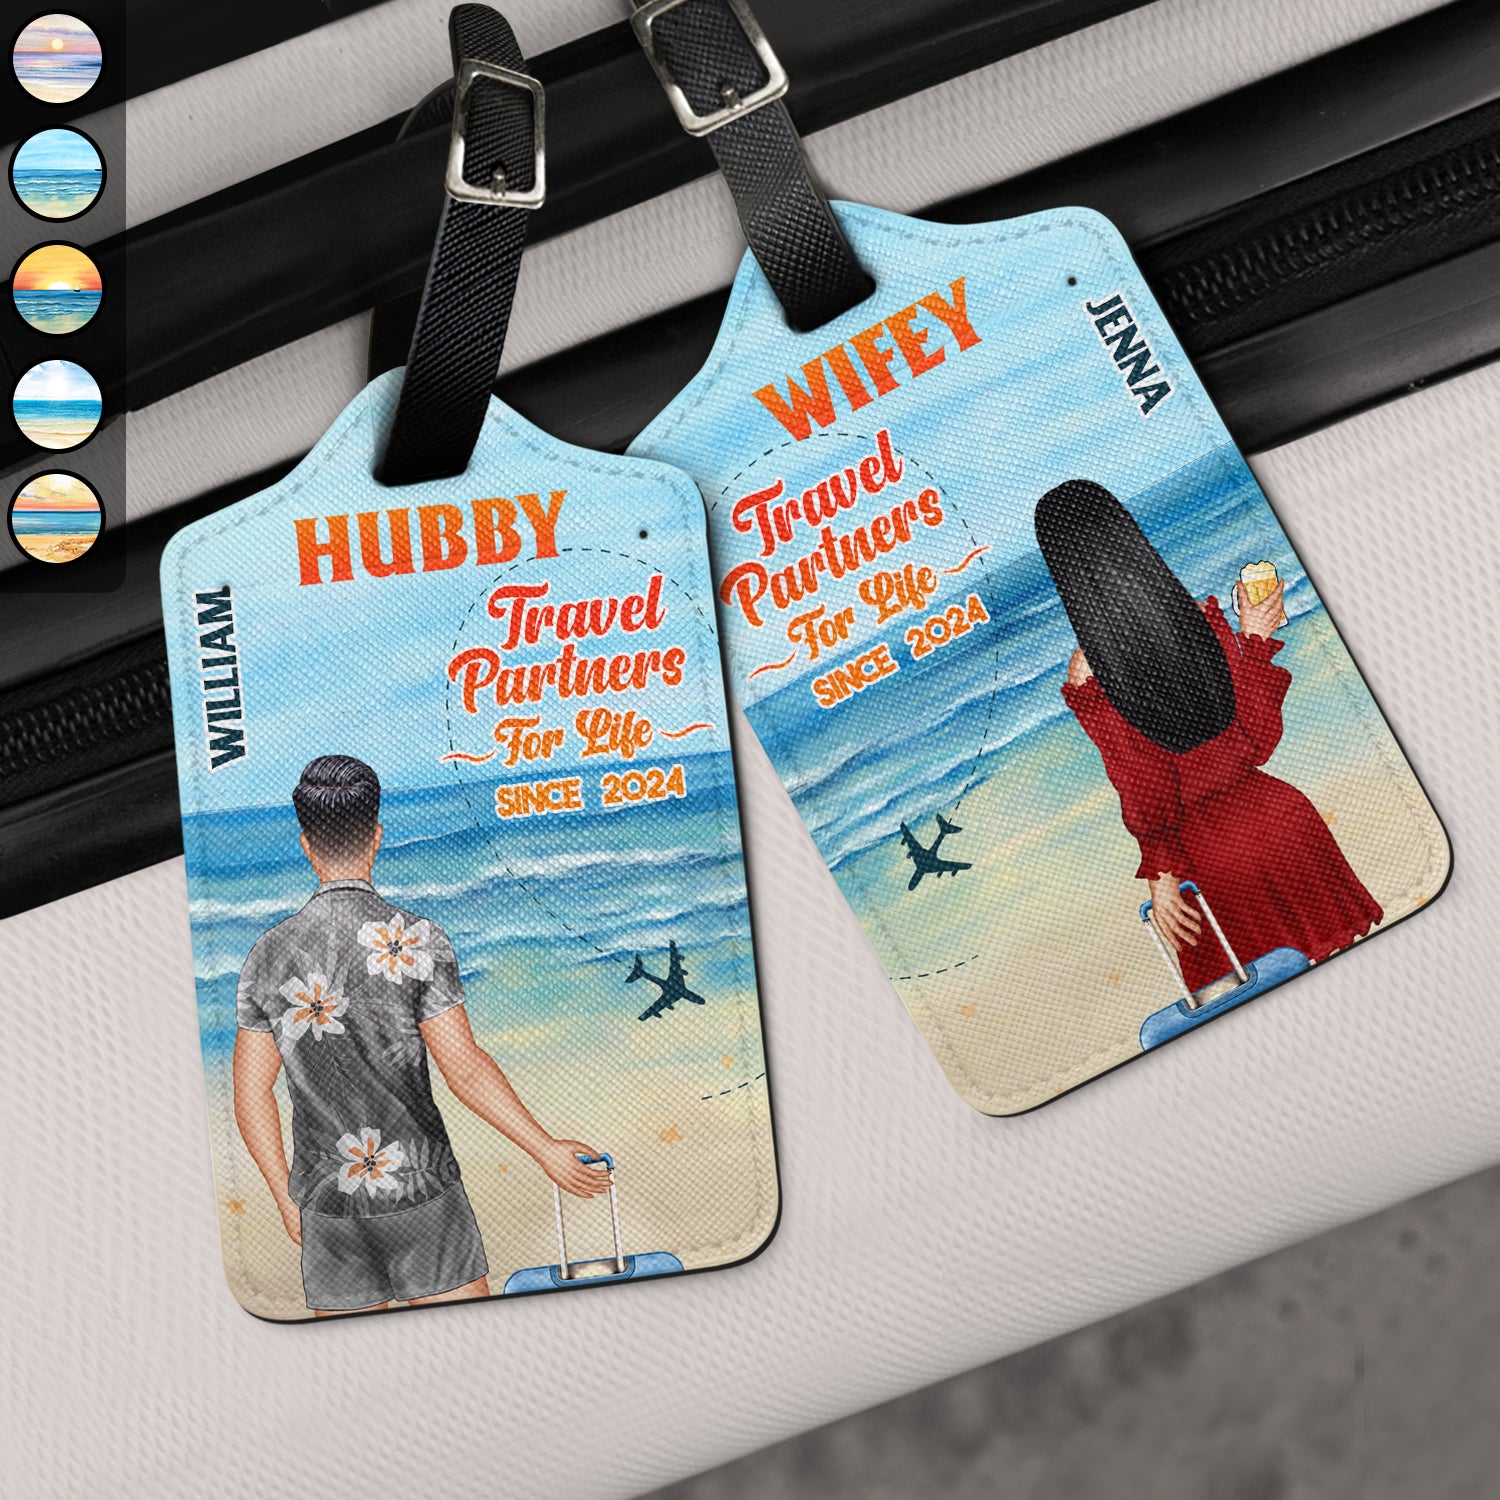 Beach Couple Travel Hubby & Wifey Travel Partners For Life - Gift For Couples, Traveling Gift - Personalized Combo 2 Luggage Tags